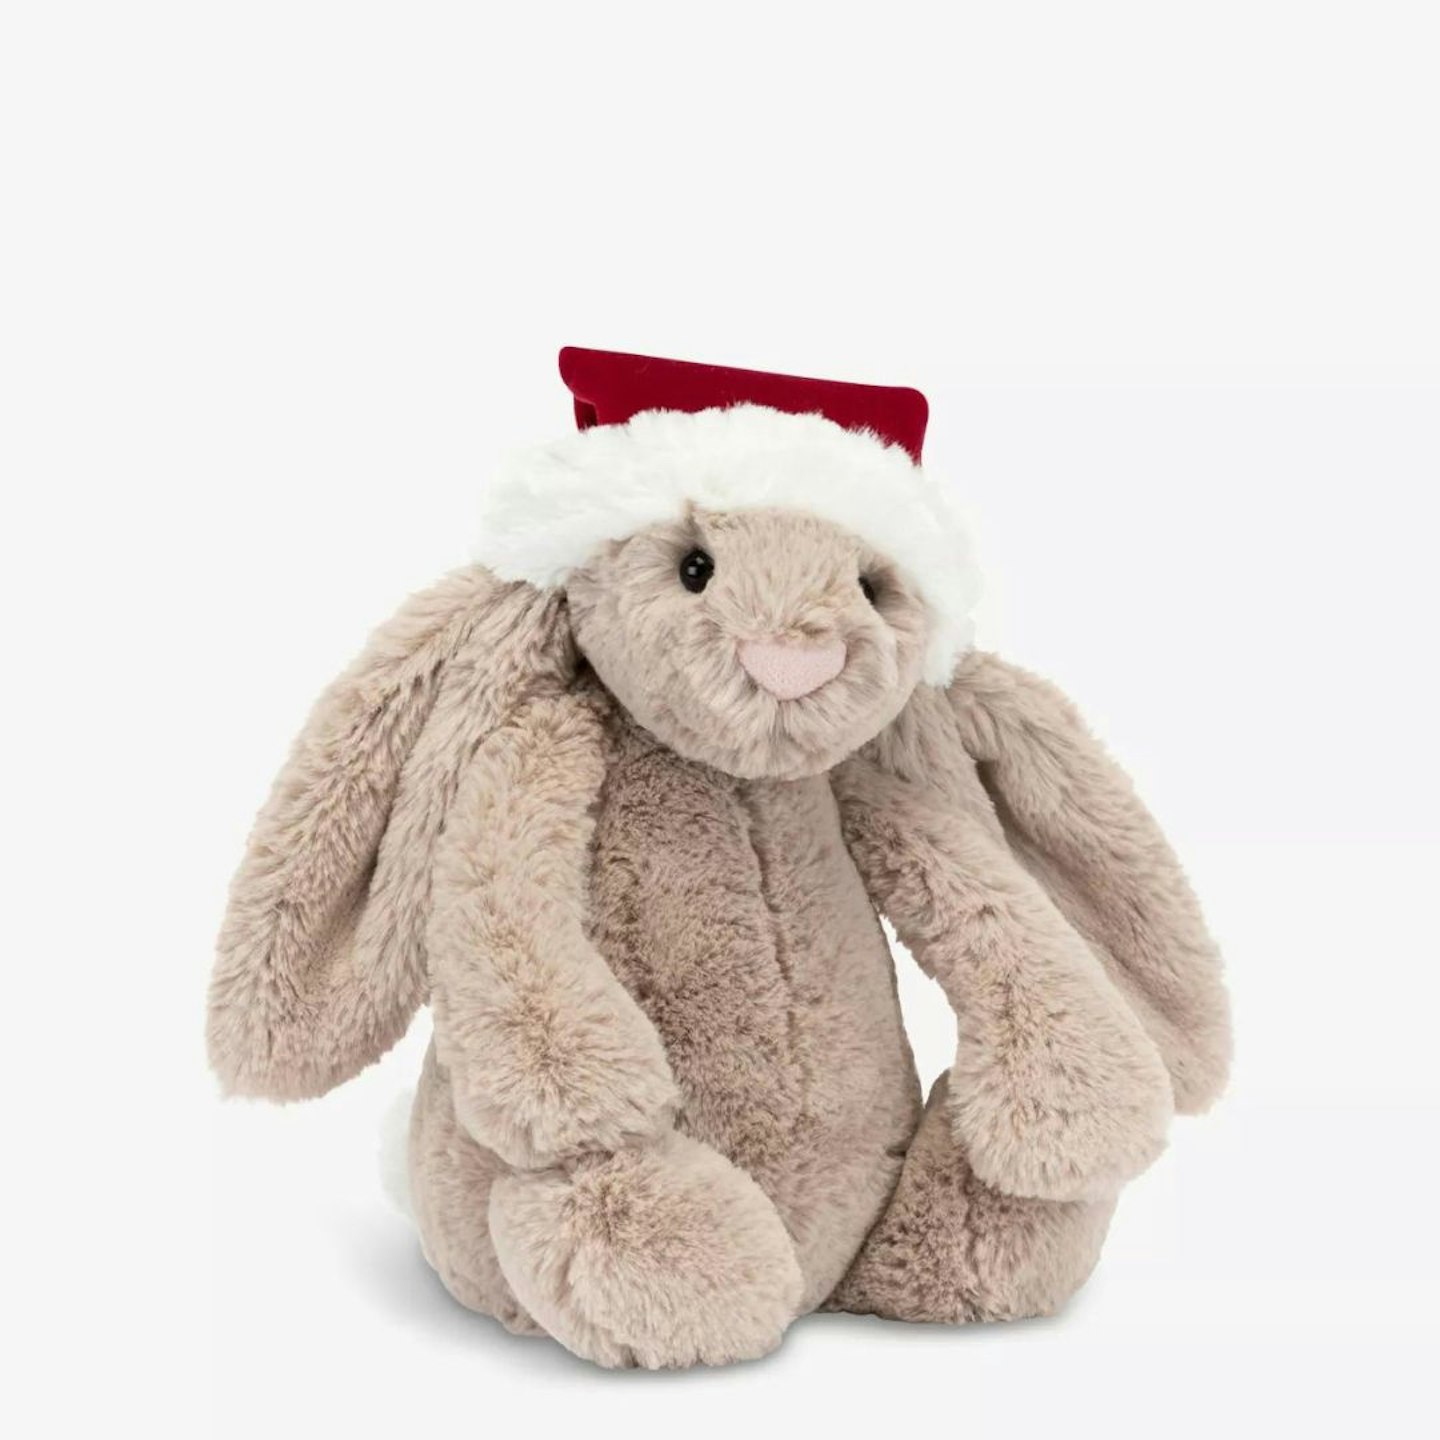 Best Christmas Gifts For Kids: Bashful Christmas Bunny soft toy